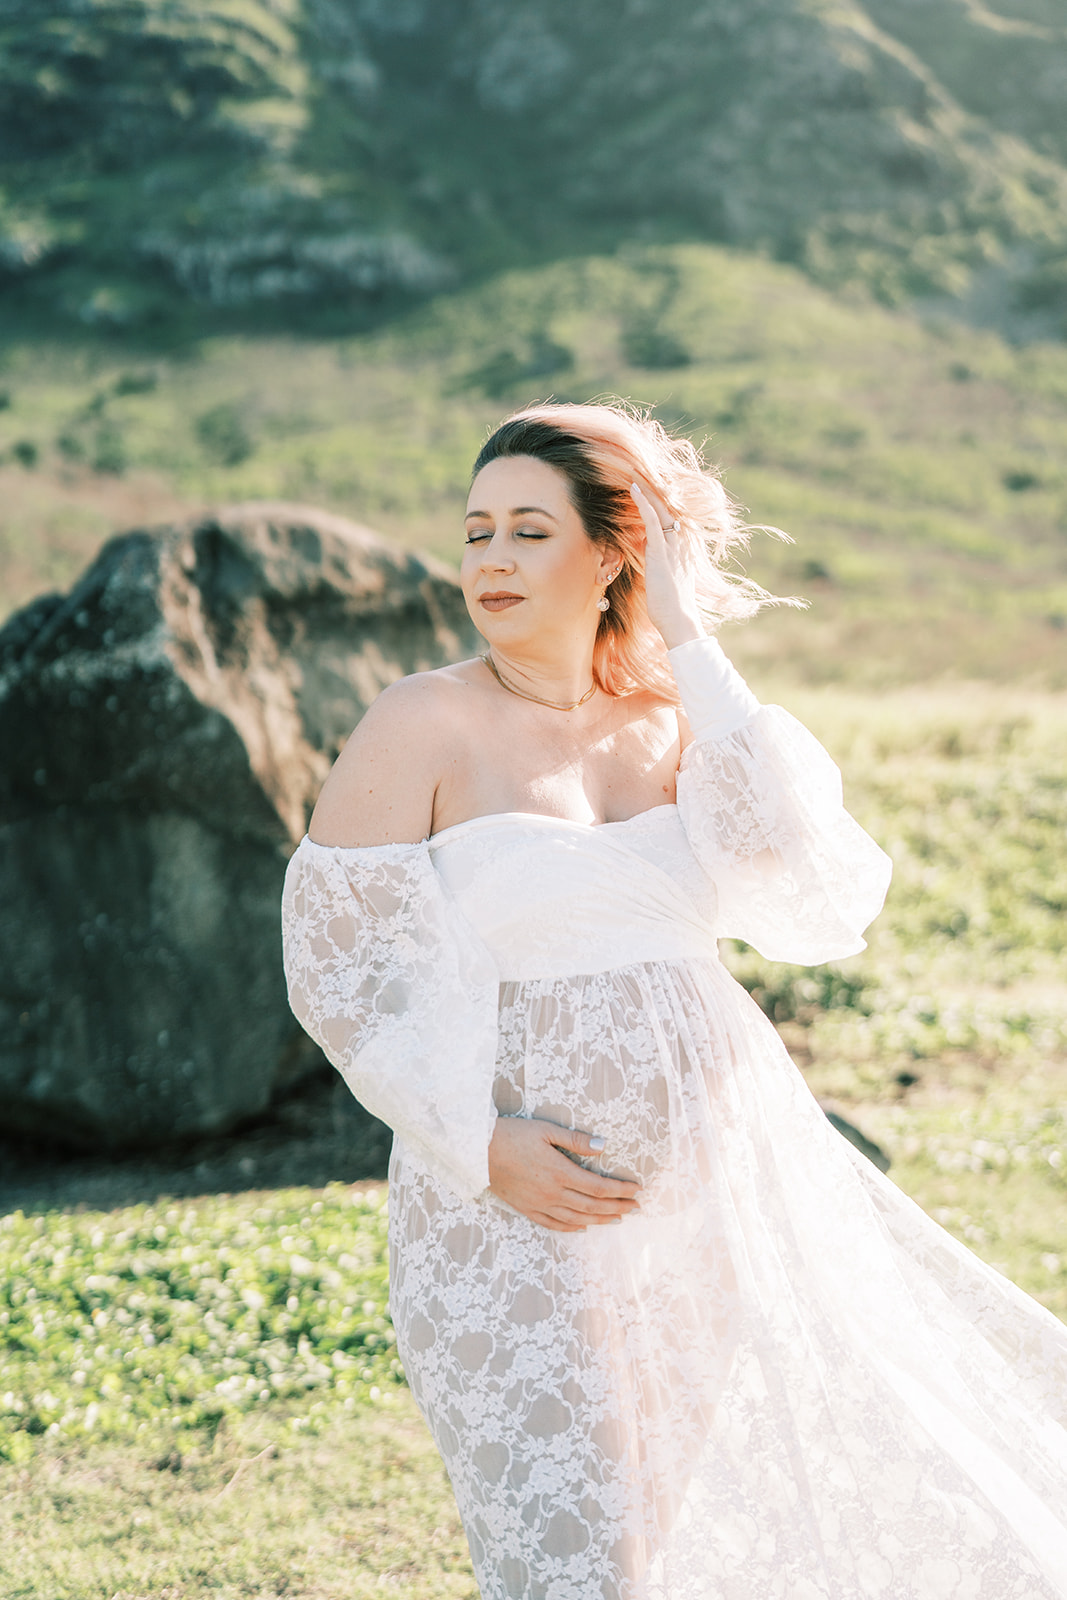 A pregnant woman in a white lace dress holding her hair back in a sunny, grassy field with a hill.